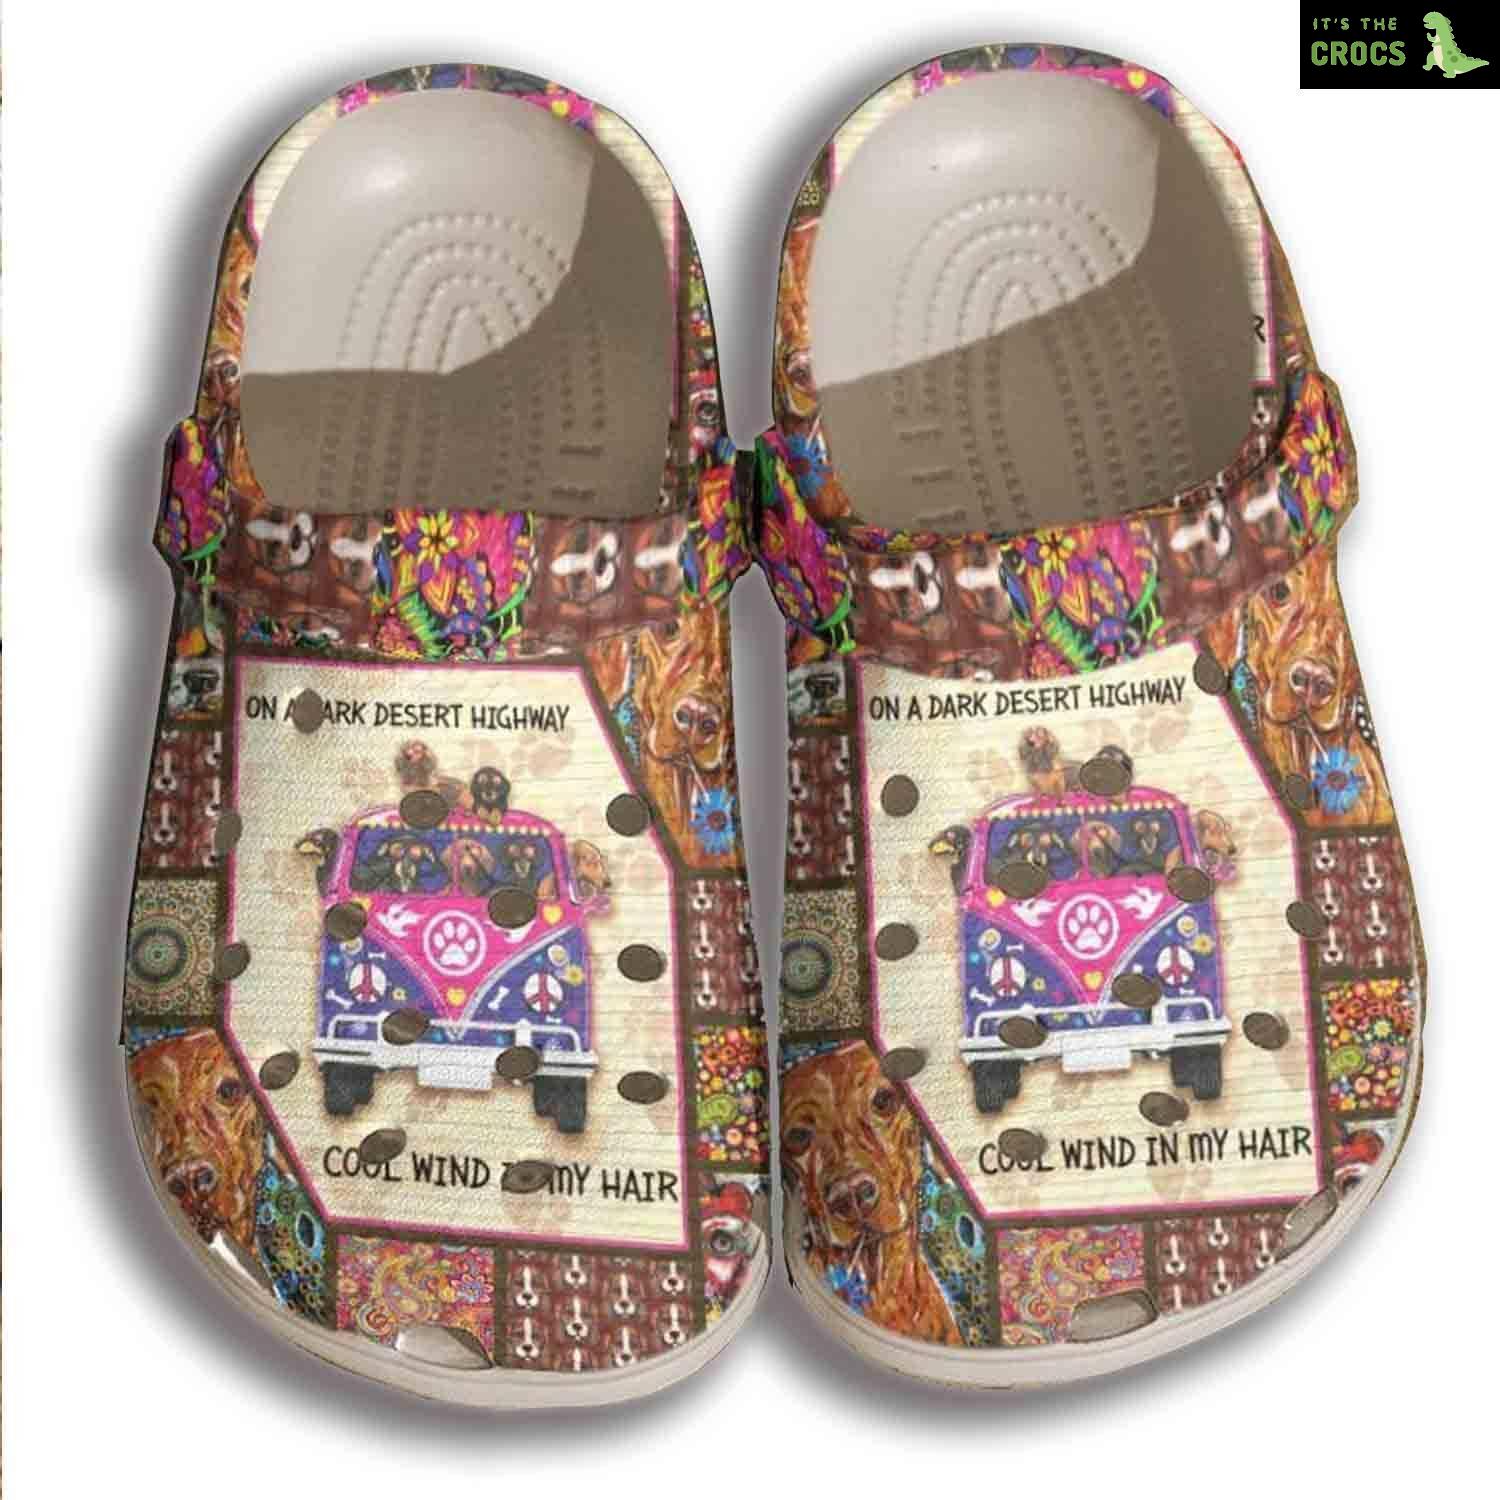 Hippie Dachshund Croc Shoes Men Women – Dog Bus On Highway Shoes Crocbland Clog Gifts For Son Daughter